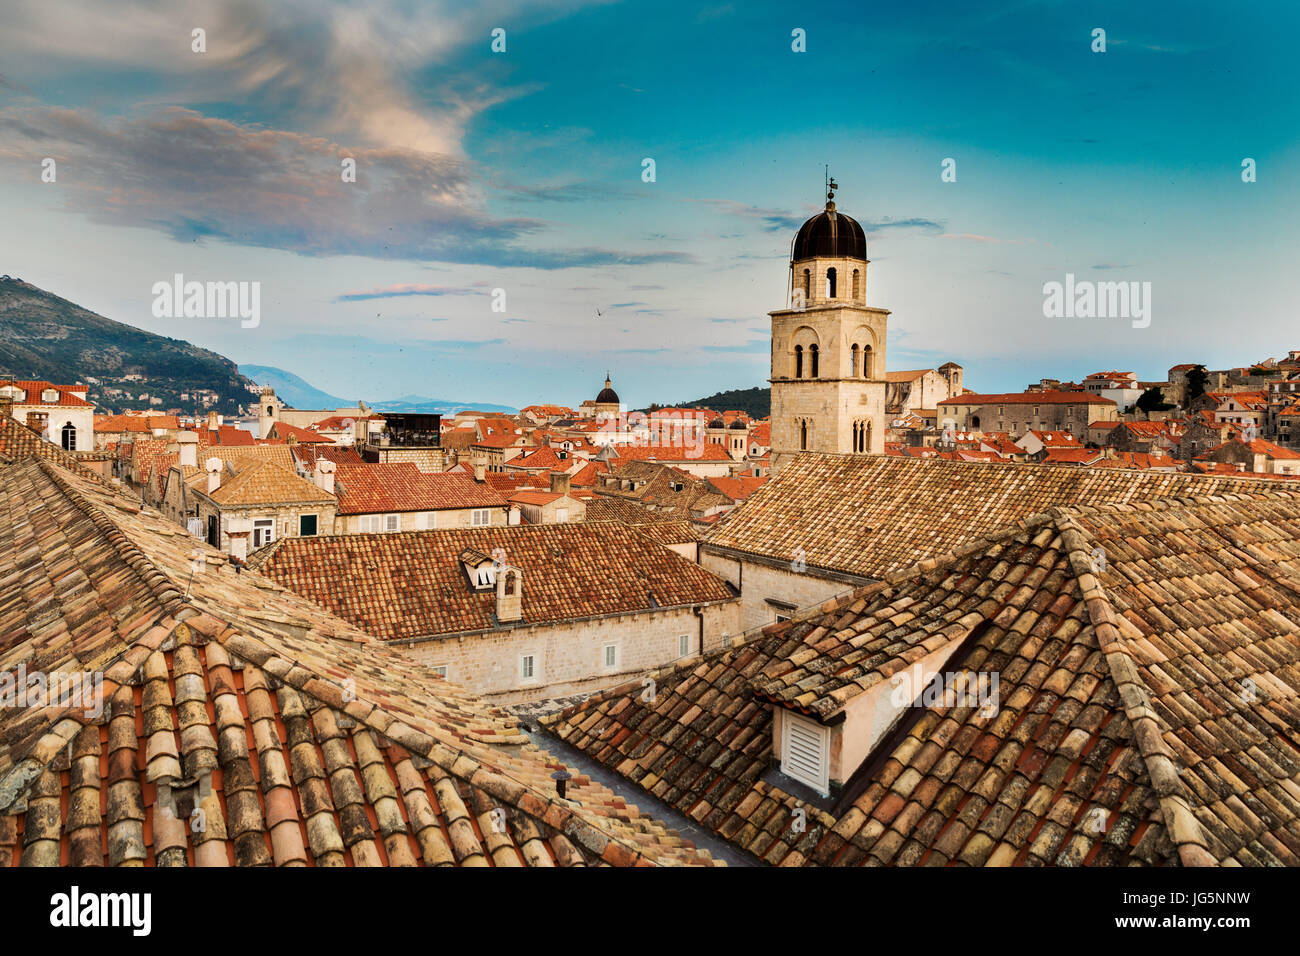 view over dubrovnik old town roofs in croatia Stock Photo